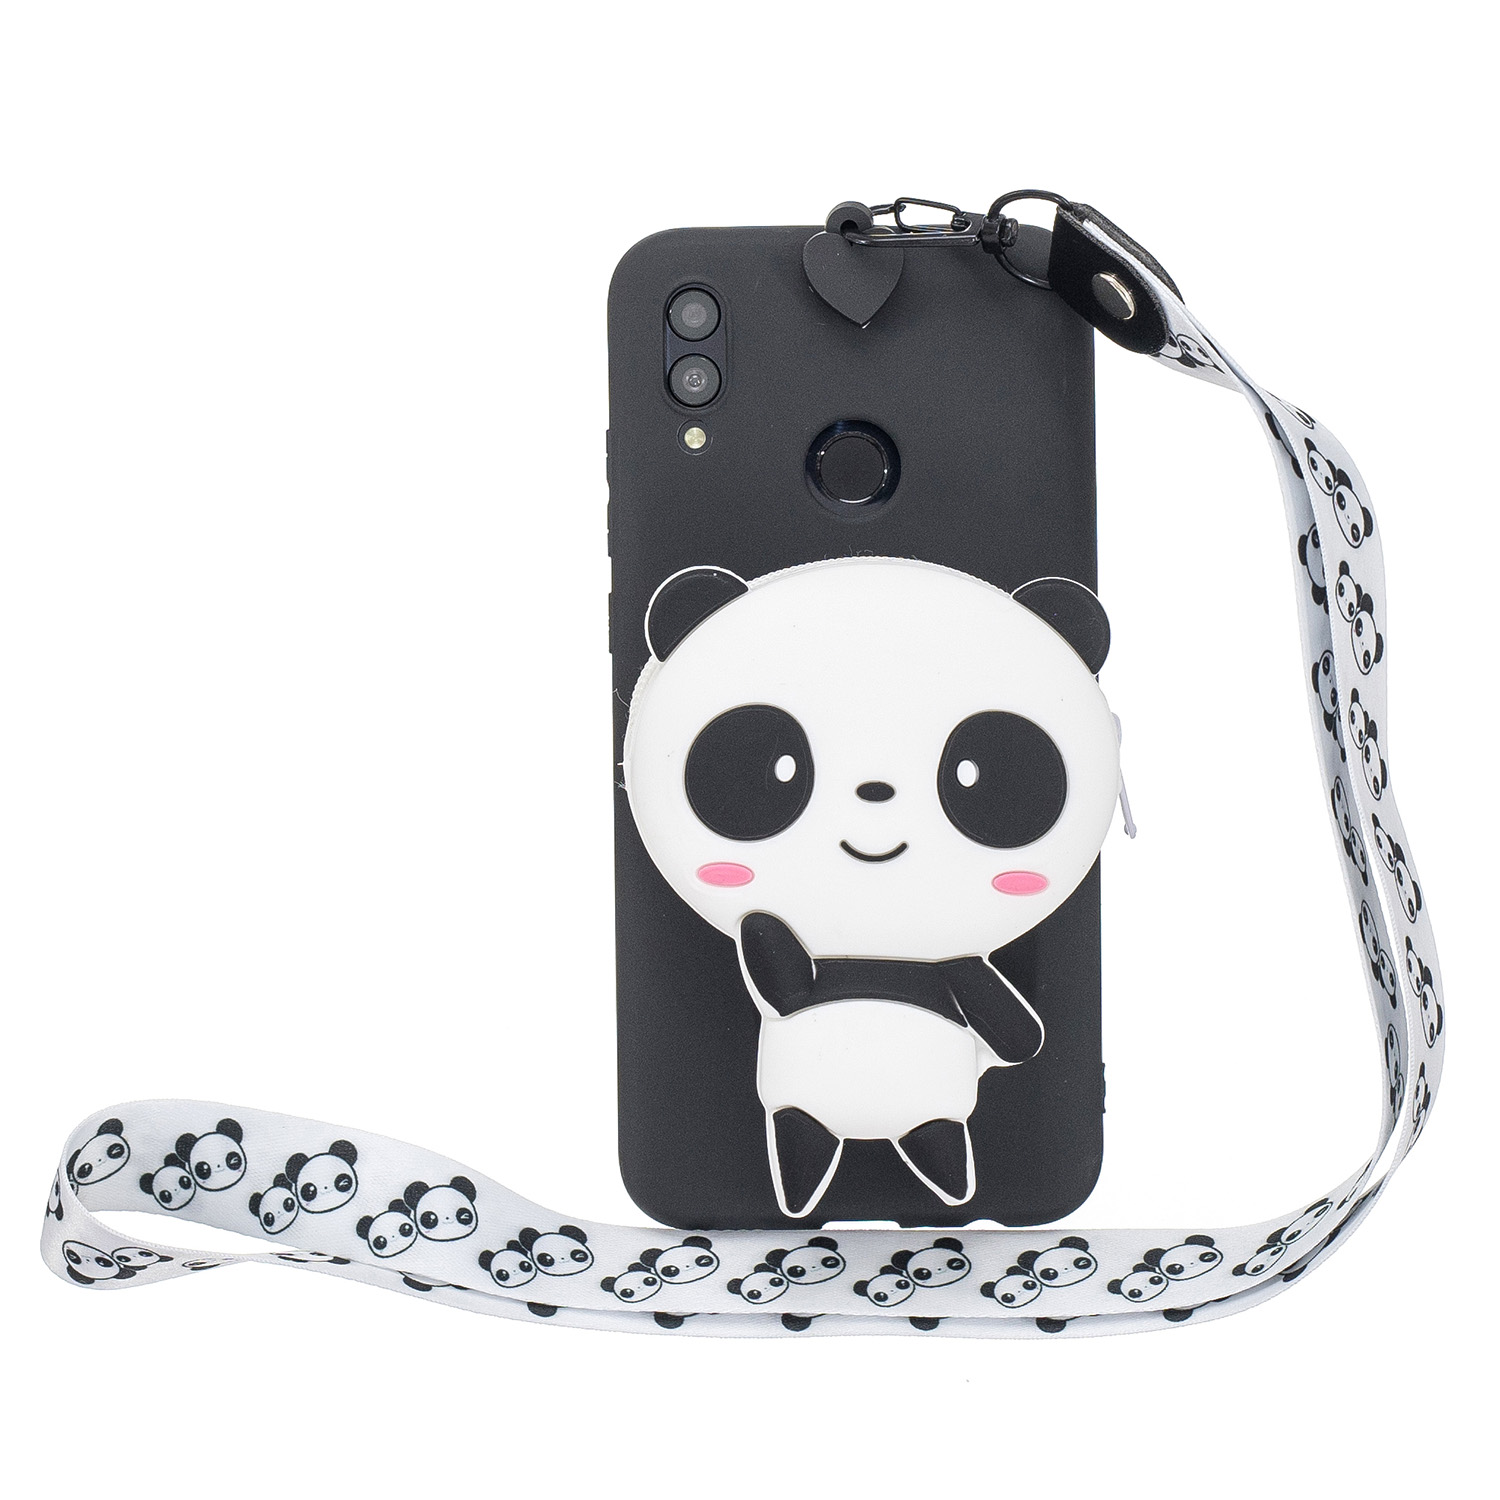 For HUAWEI Y6 2019 Y7 2019 Y9 2019 Cartoon Full Protective TPU Mobile Phone Cover with Mini Coin Purse+Cartoon Hanging Lanyard 4 black pandas